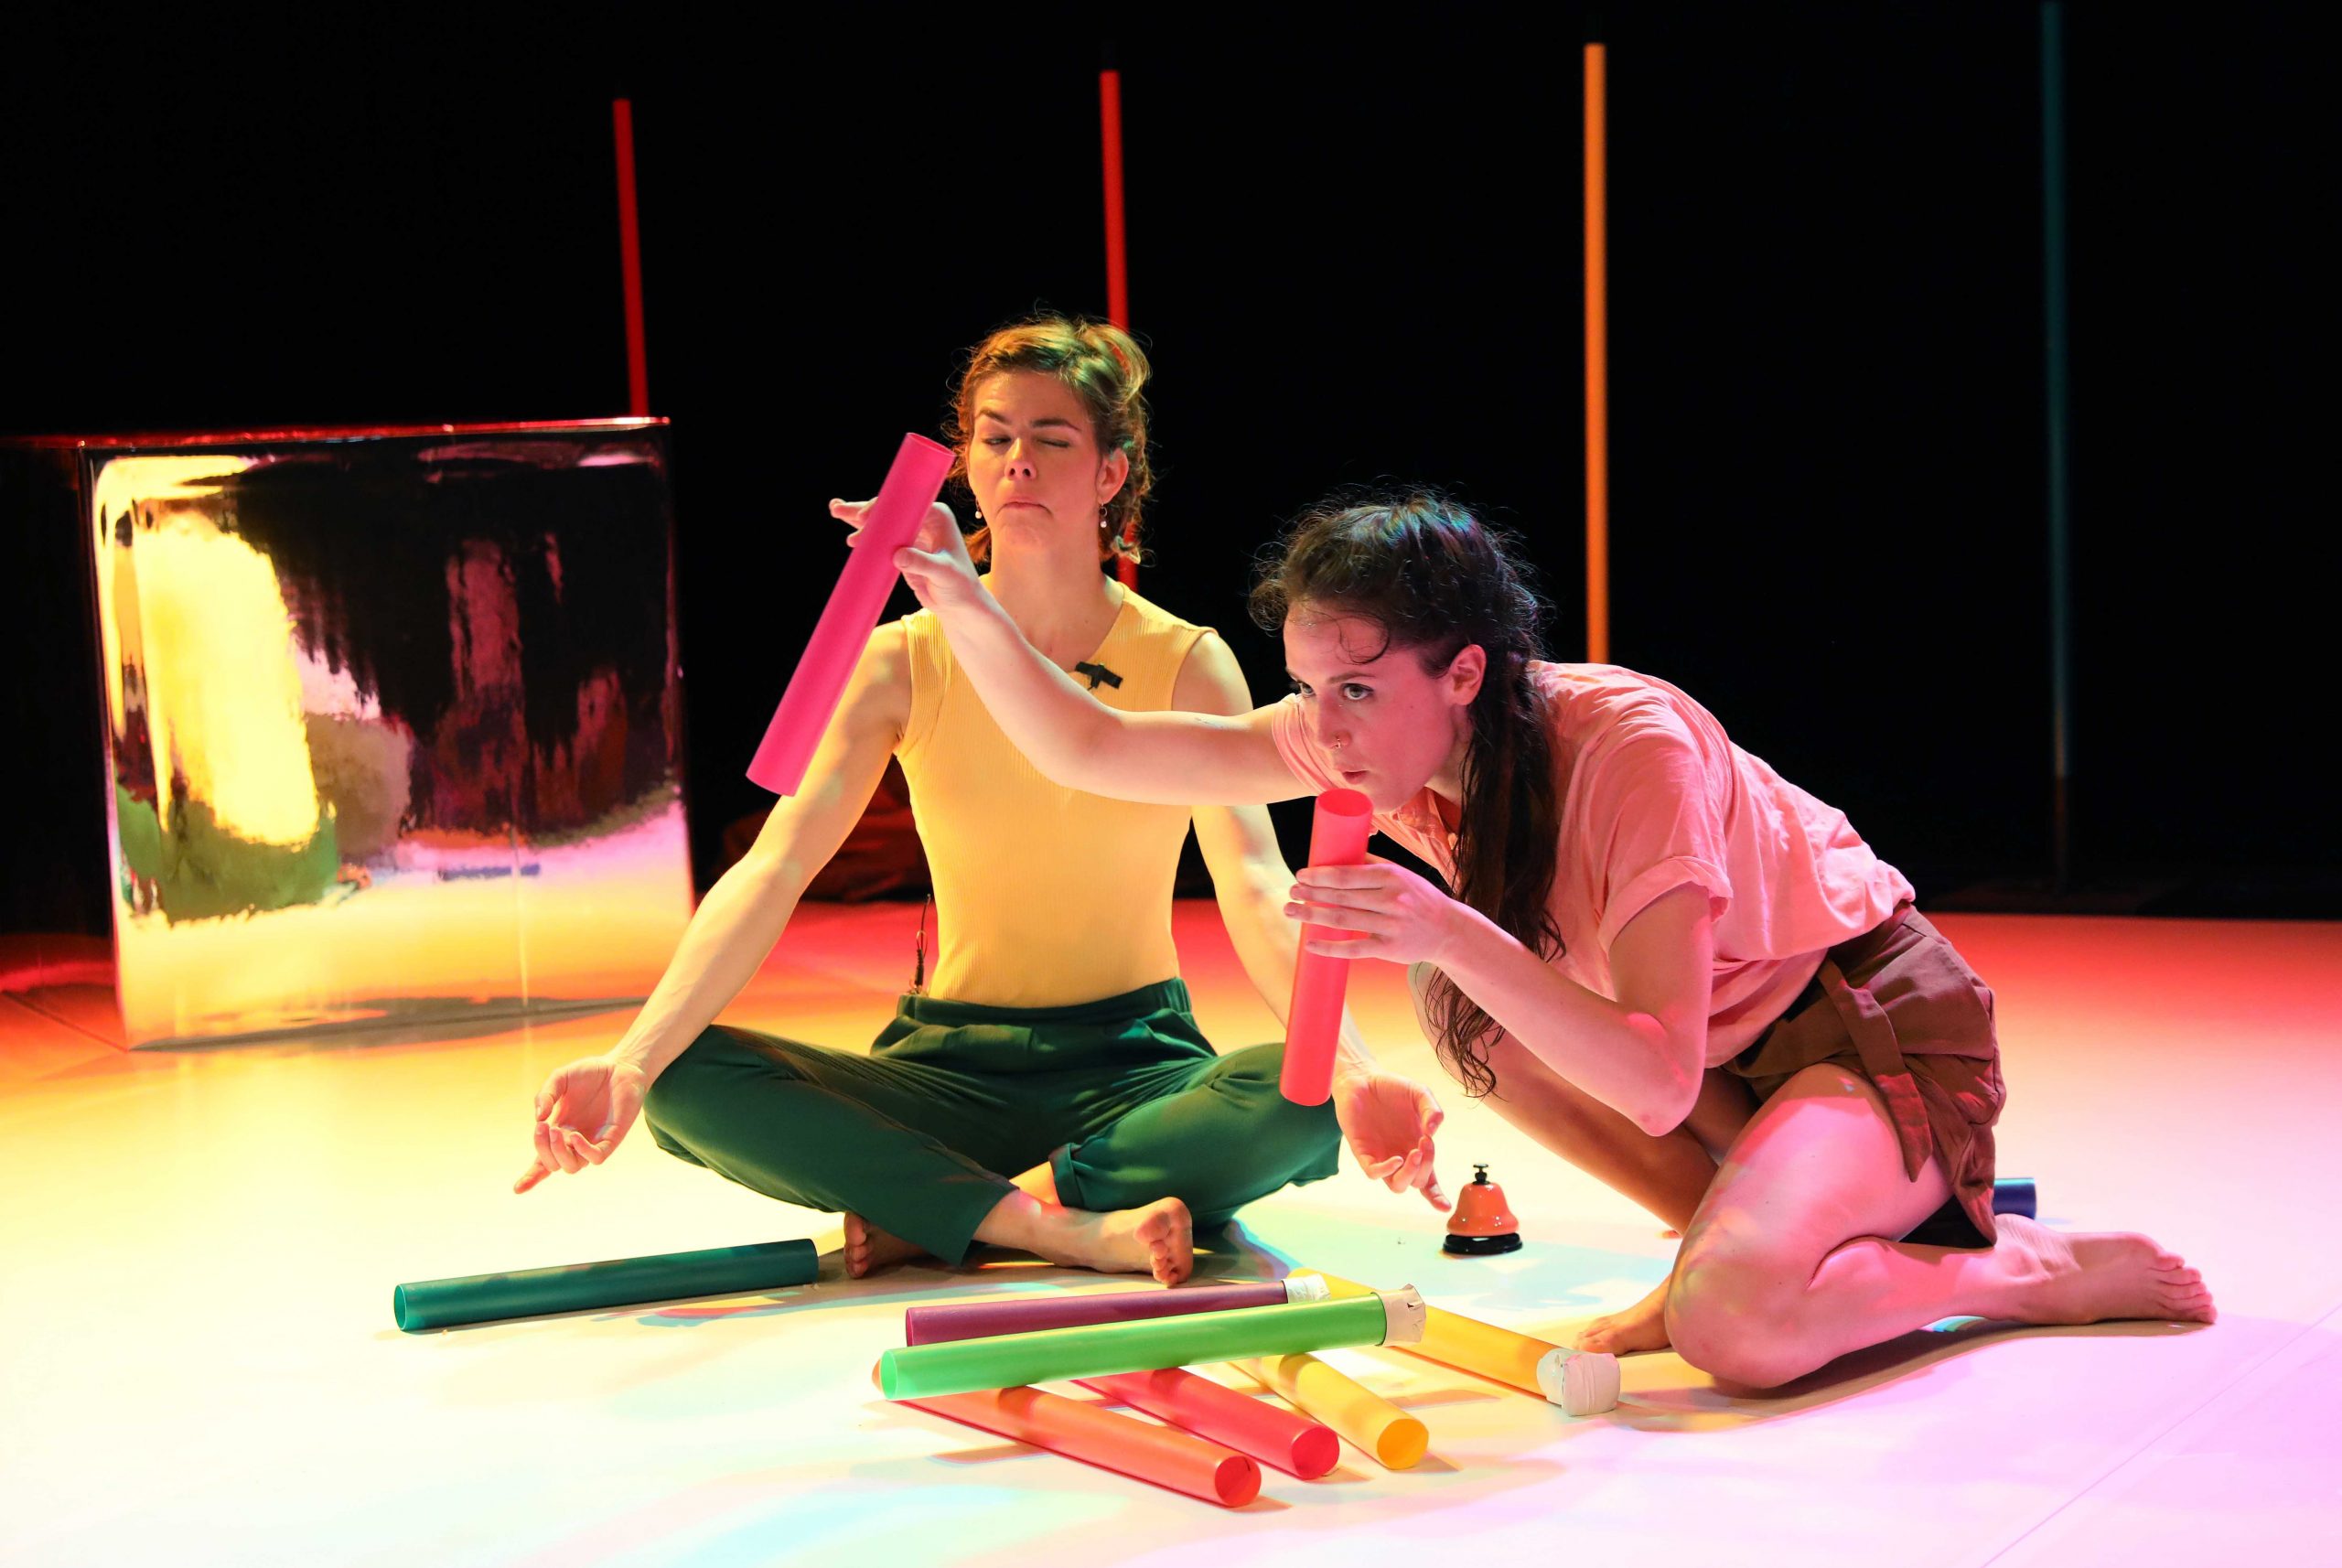 Two figures are on stage. The woman on the left wearing the yellow top and green trousers has her legs crossed. The woman o n the right is holding two pinks tubes and is on one knee. She wears a cream shirt and brown shorts.